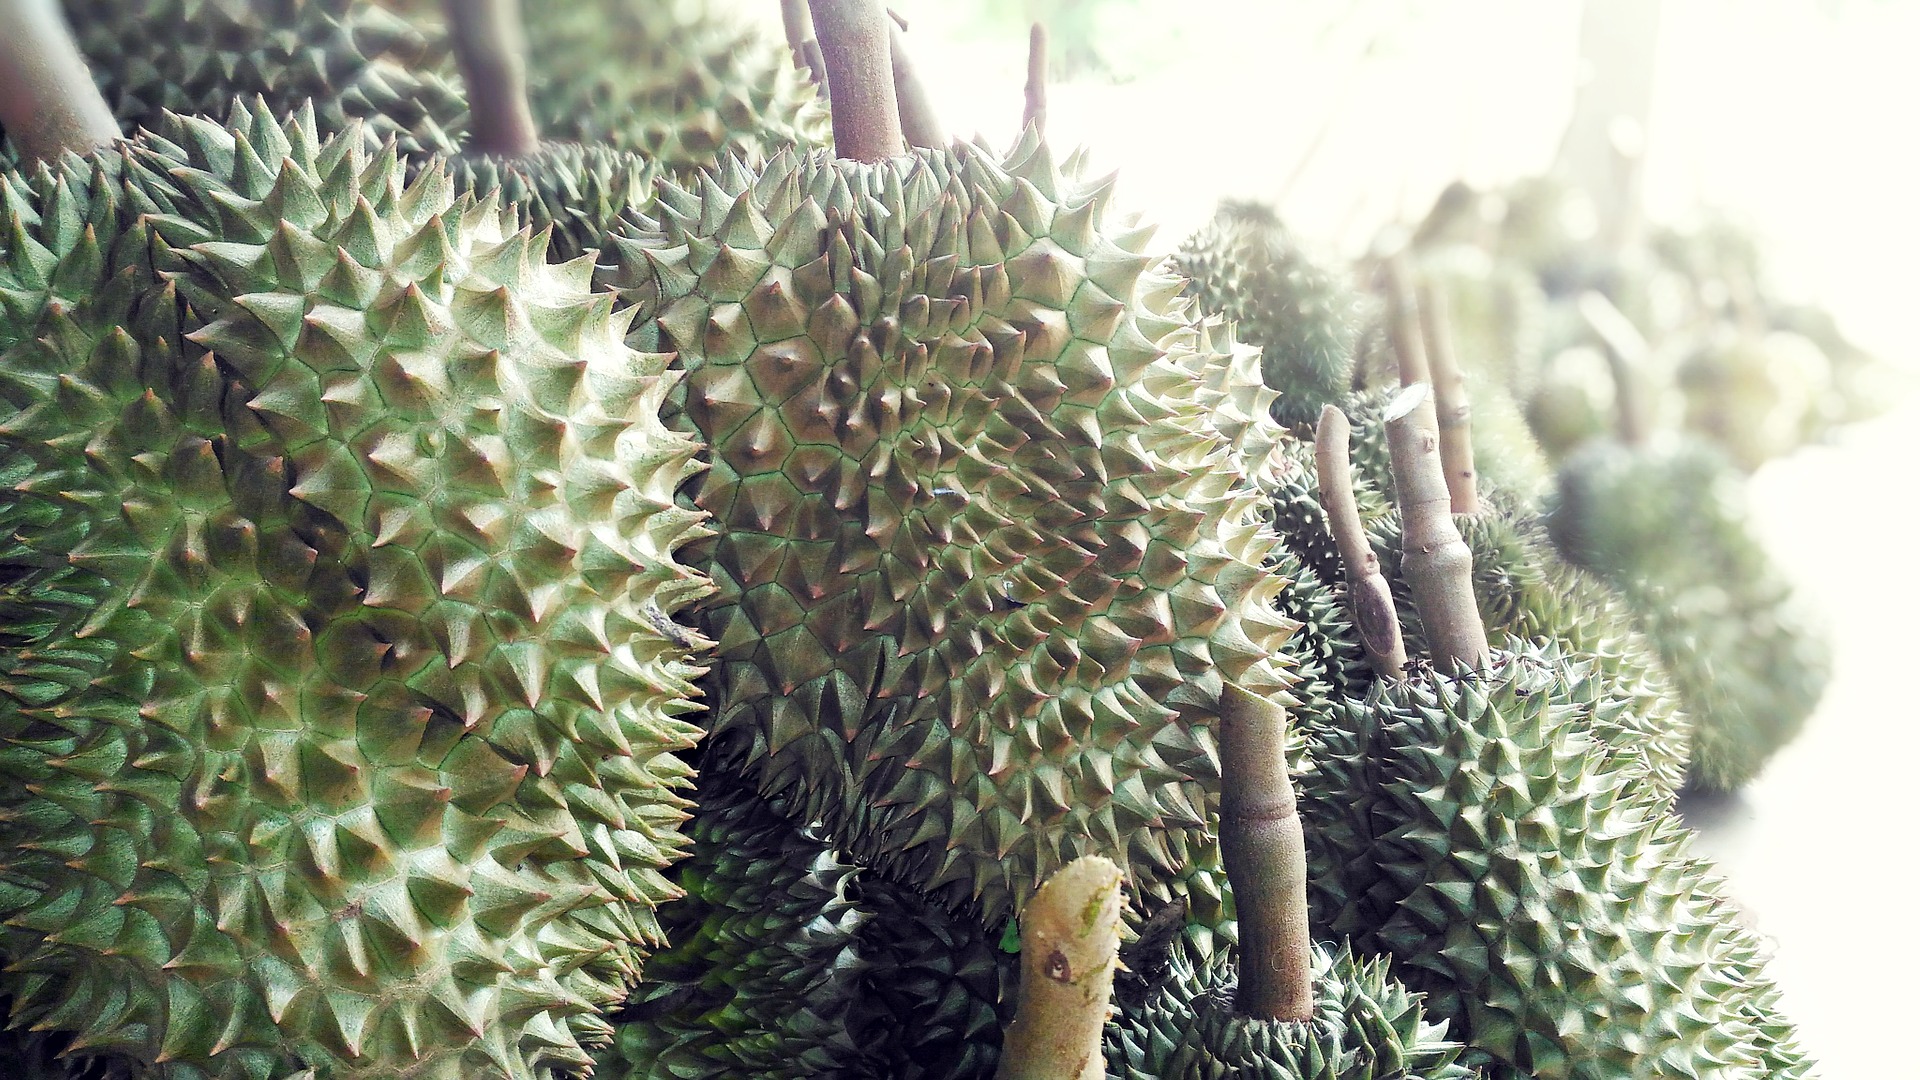 Vietnam's durian exports hit a record high of 15 billion yuan, with strong demand in the Chinese market